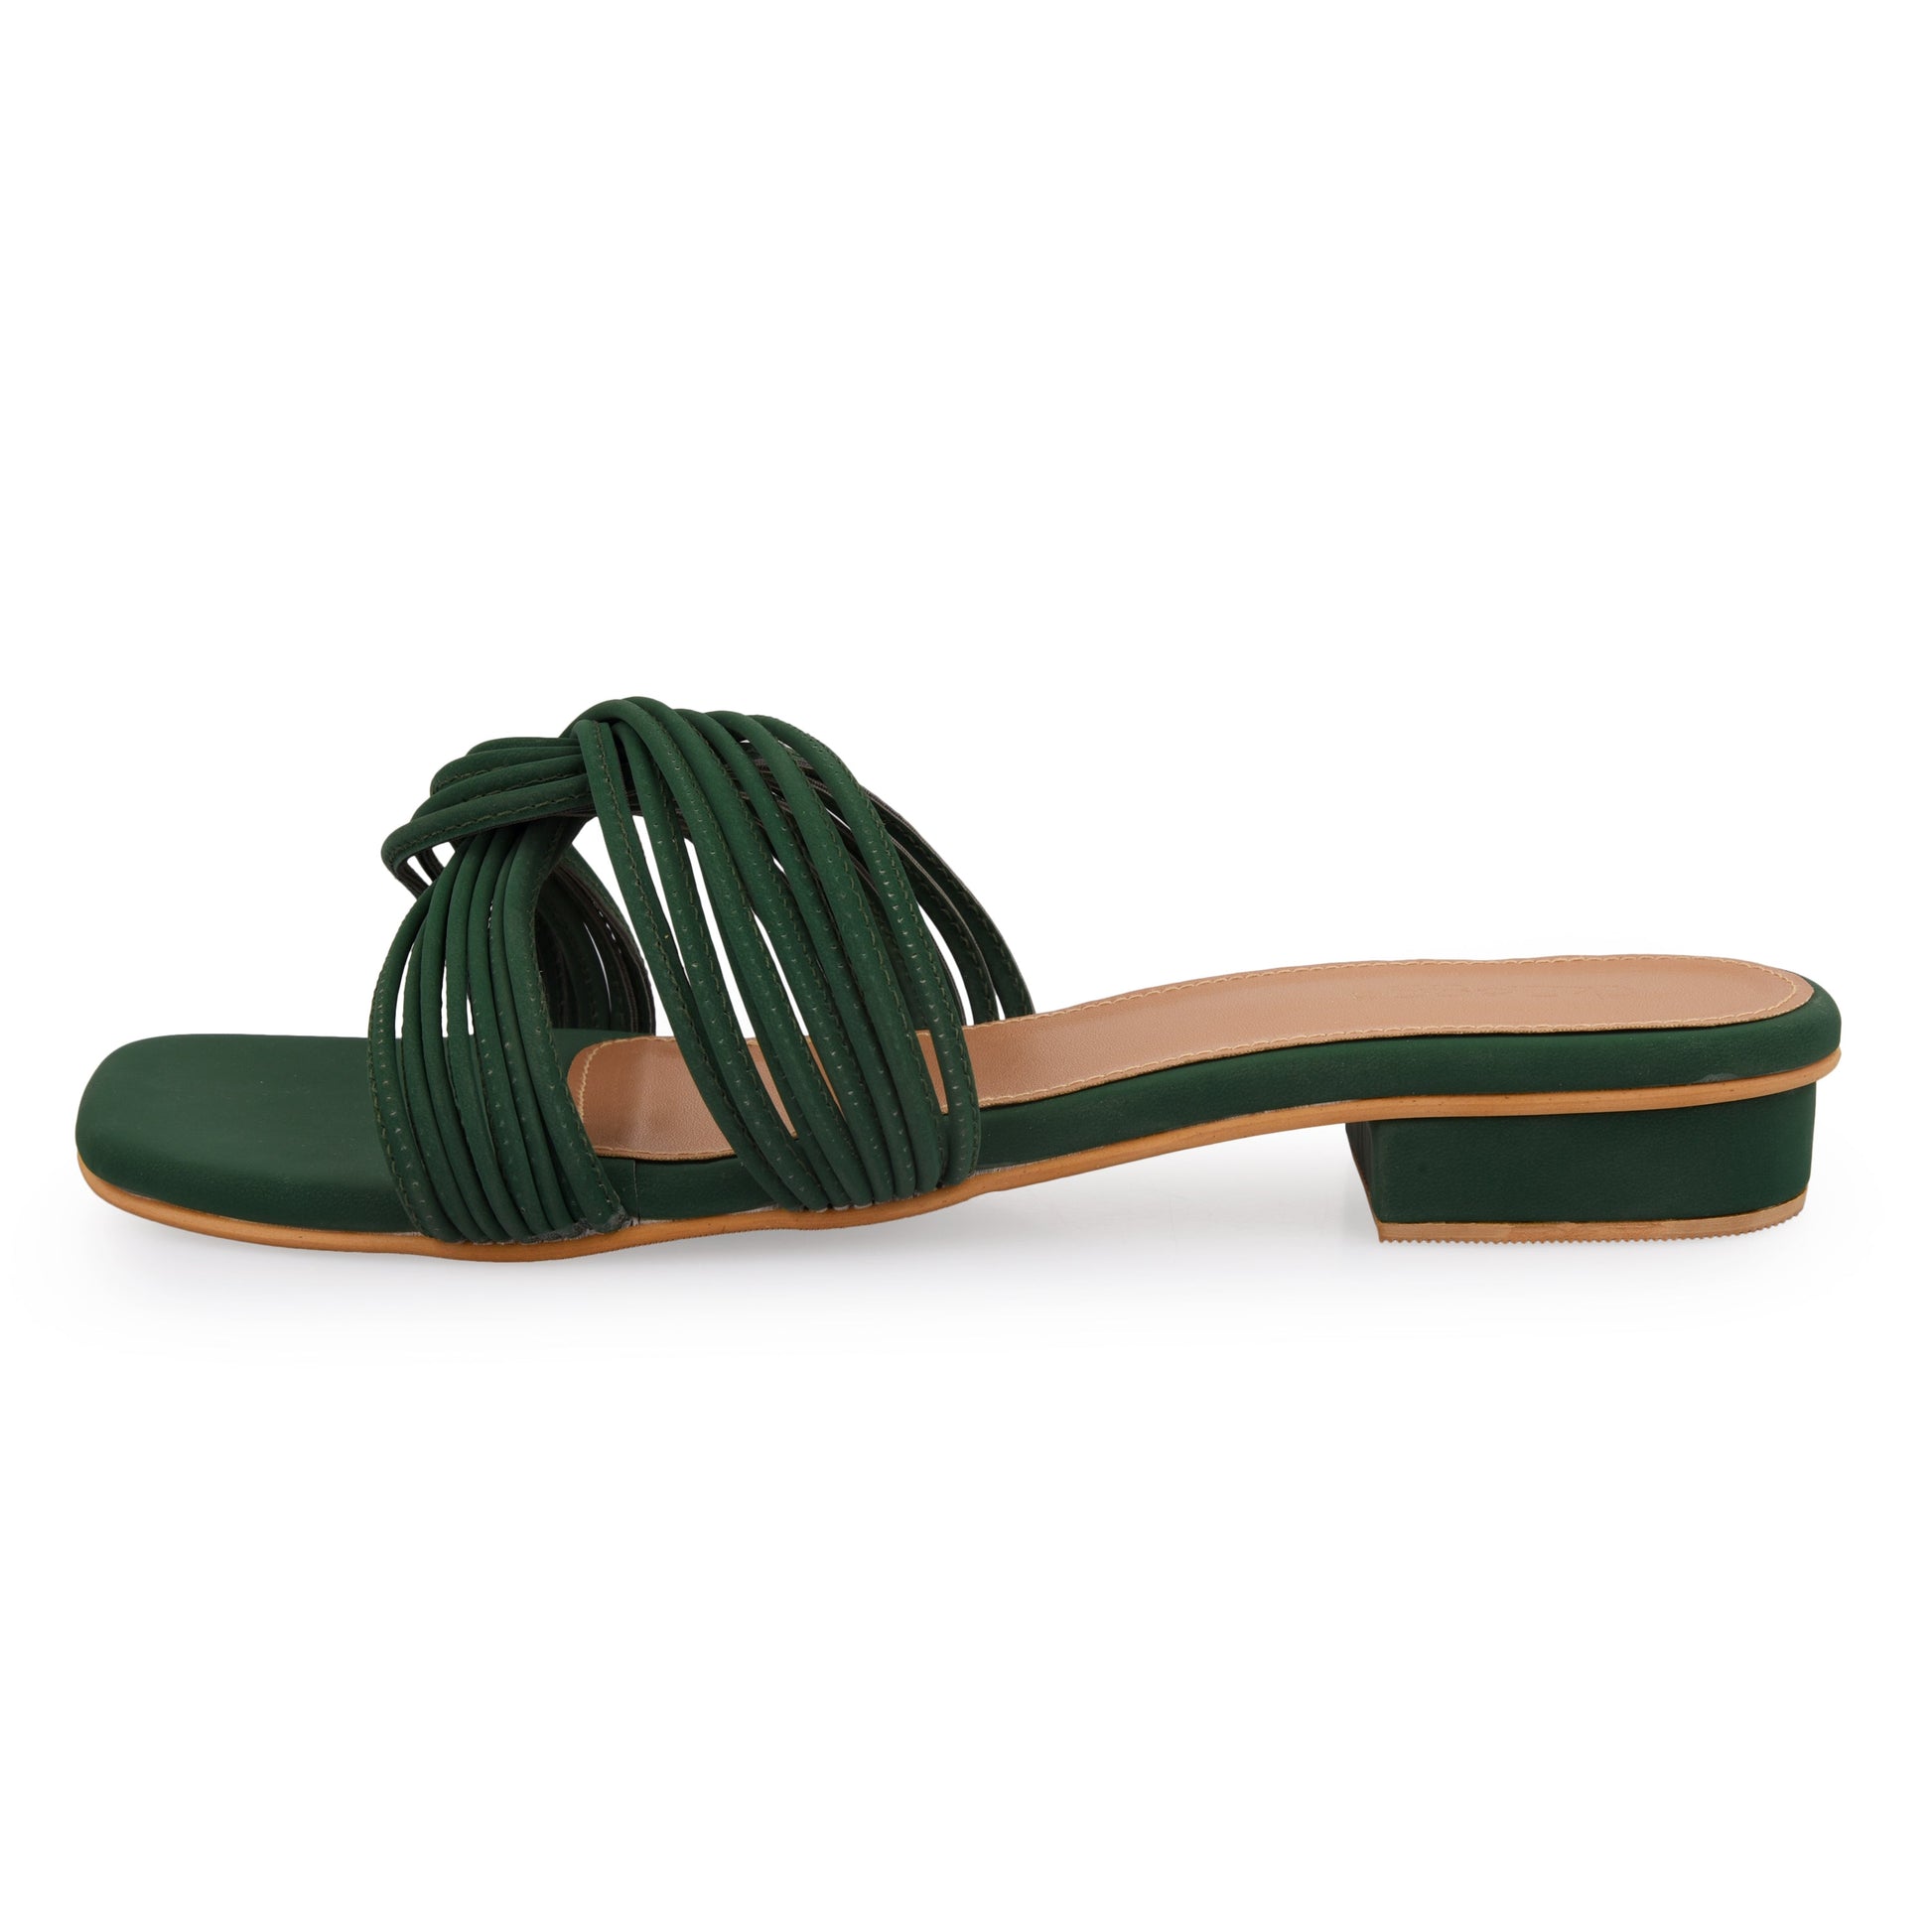 Interlock Flat at Kamakhyaa by EK_agga. This item is Evening Wear, Flats, Green, Not Priced, Open Toes, Patent leather, Regular Fit, Textured, Vegan